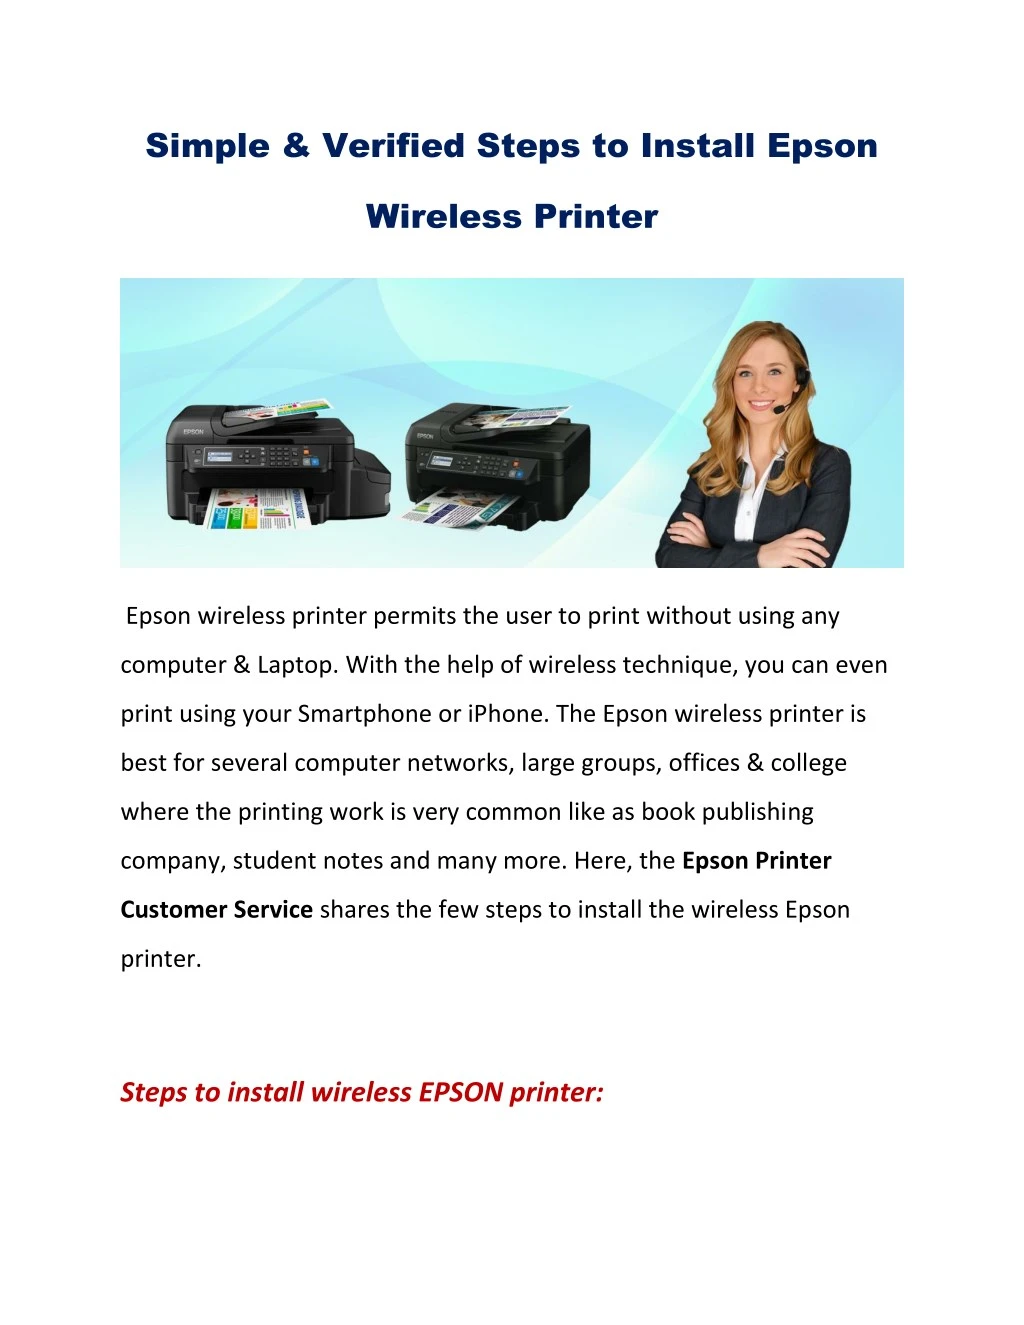 simple verified steps to install epson